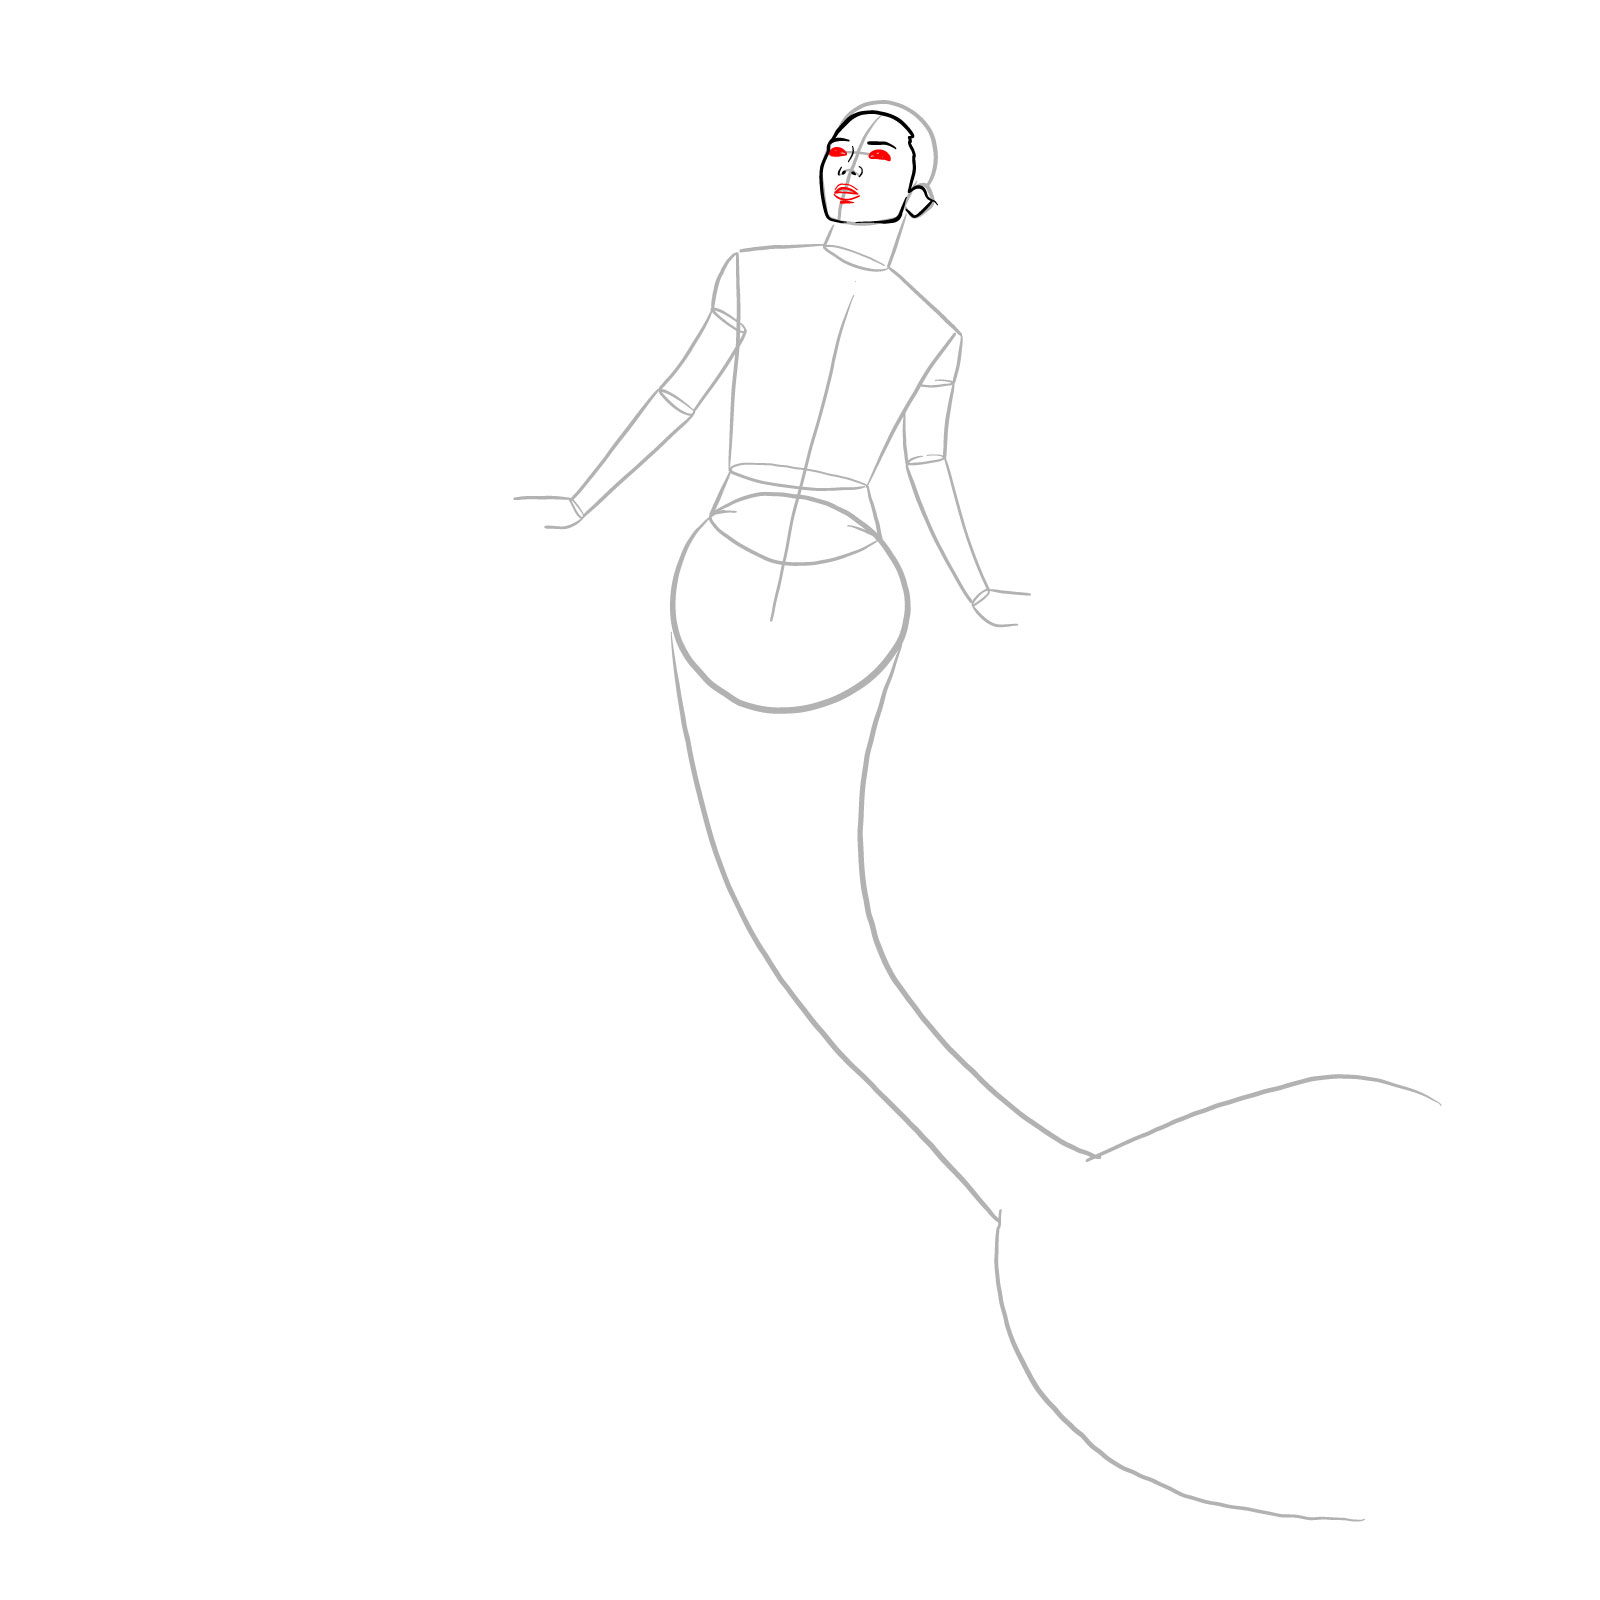 How to draw a Mermaid - step 07